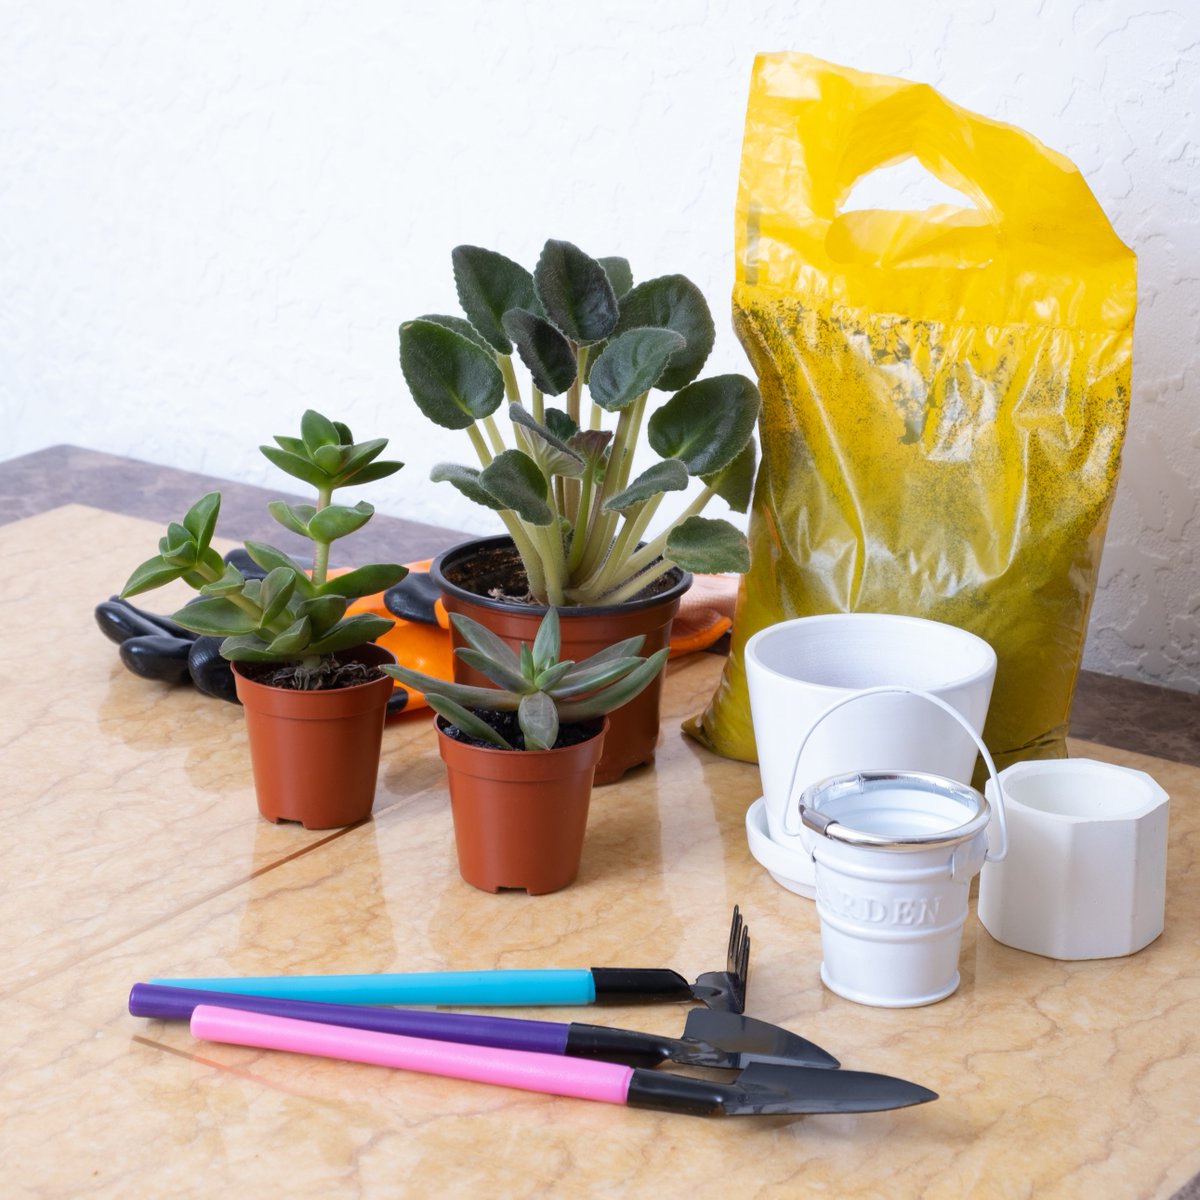 Join us tomorrow, Monday 12th June at 11am, for GIAG Plant and Paint. 🪴 Bring along a plant pot, jar or container and get creative with paint pens then plant it up! Book now: bit.ly/42kZhN3